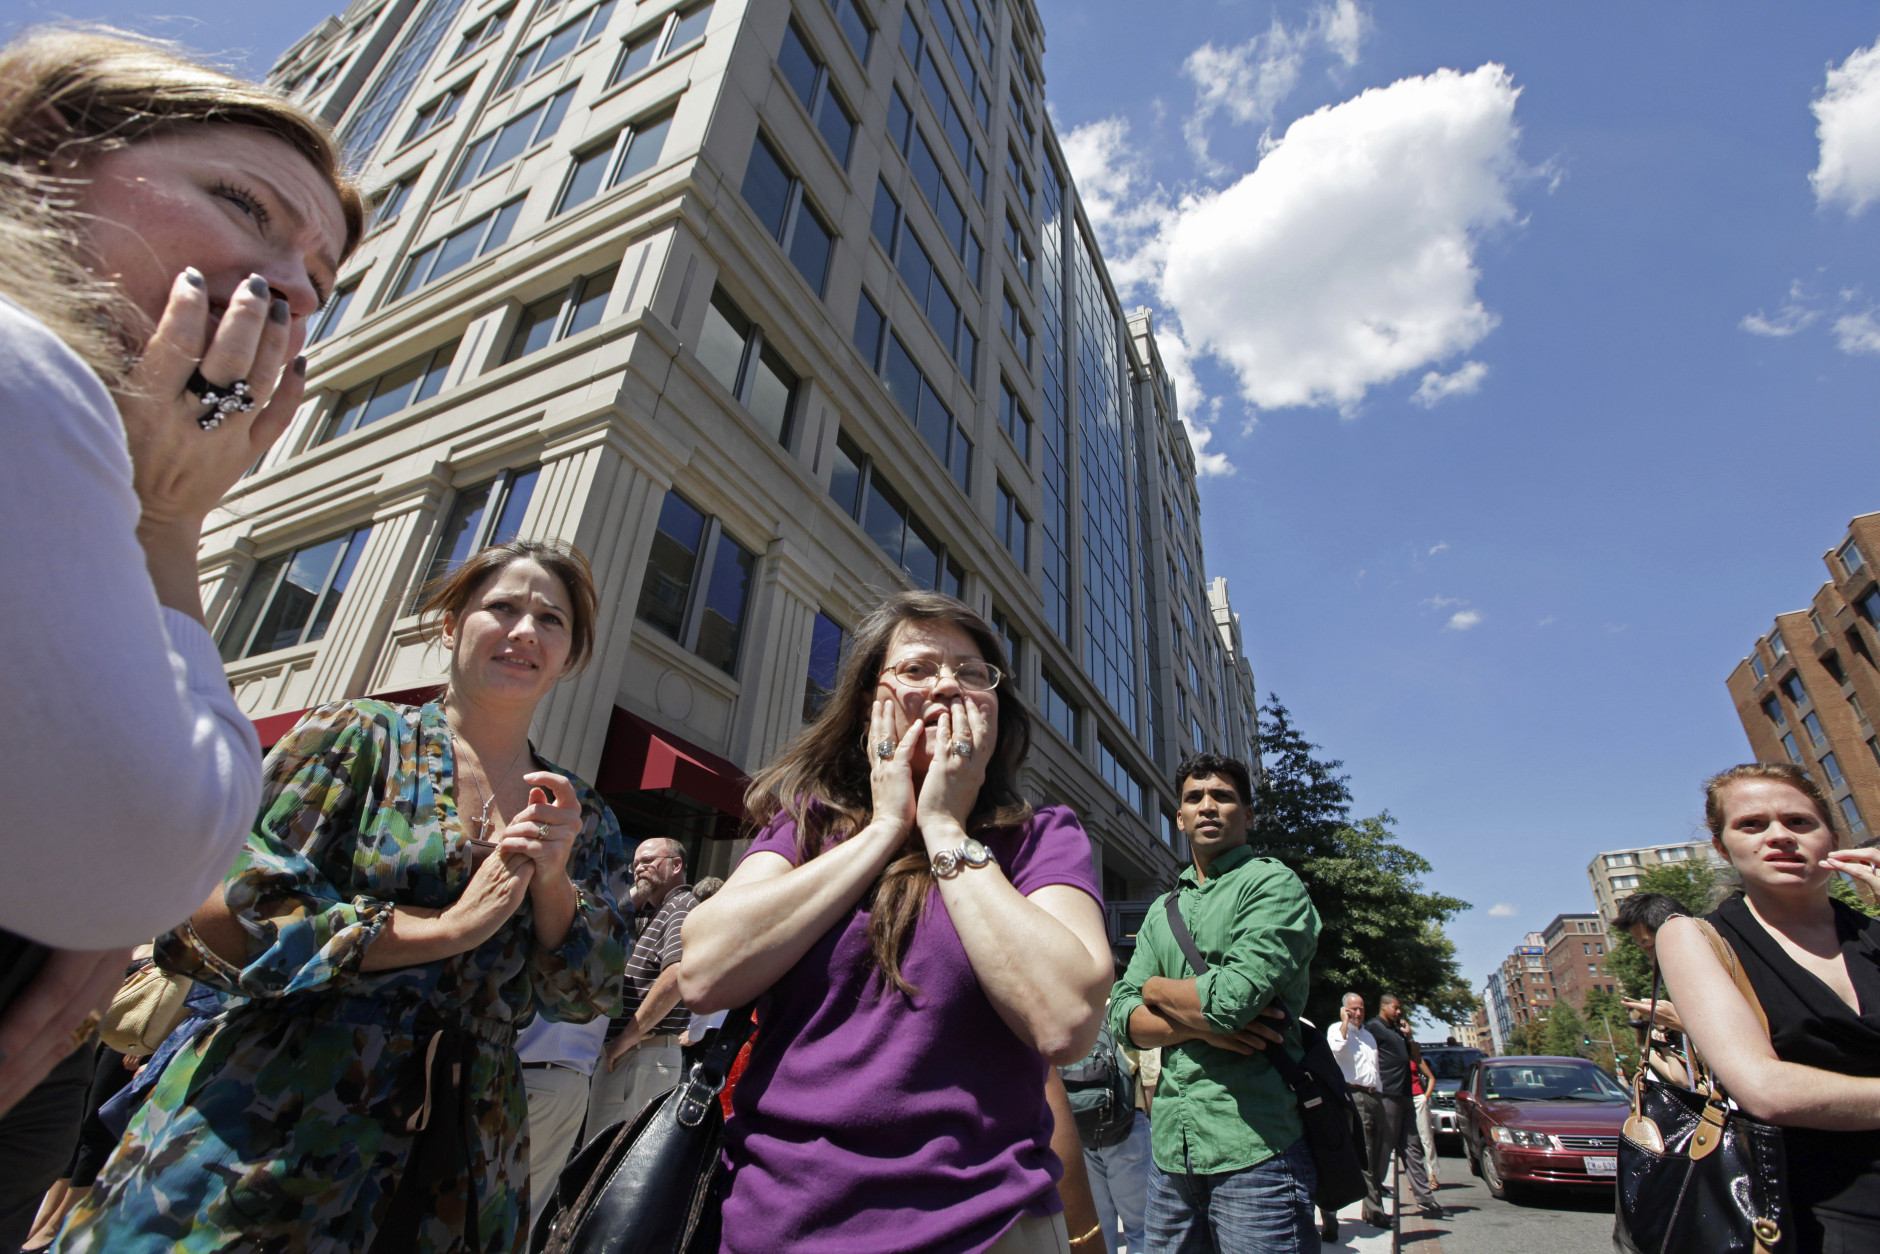 Office workers gather on the sidewalk in downtown Washington, Tuesday, Aug. 23, 2011, moments after a 5.9 magnitude tremor shook the nation's capitol. The earthquake centered northwest of Richmond, Va., shook much of Washington, D.C., and was felt as far north as Rhode Island and New York City.  (AP Photo/J. Scott Applewhite)